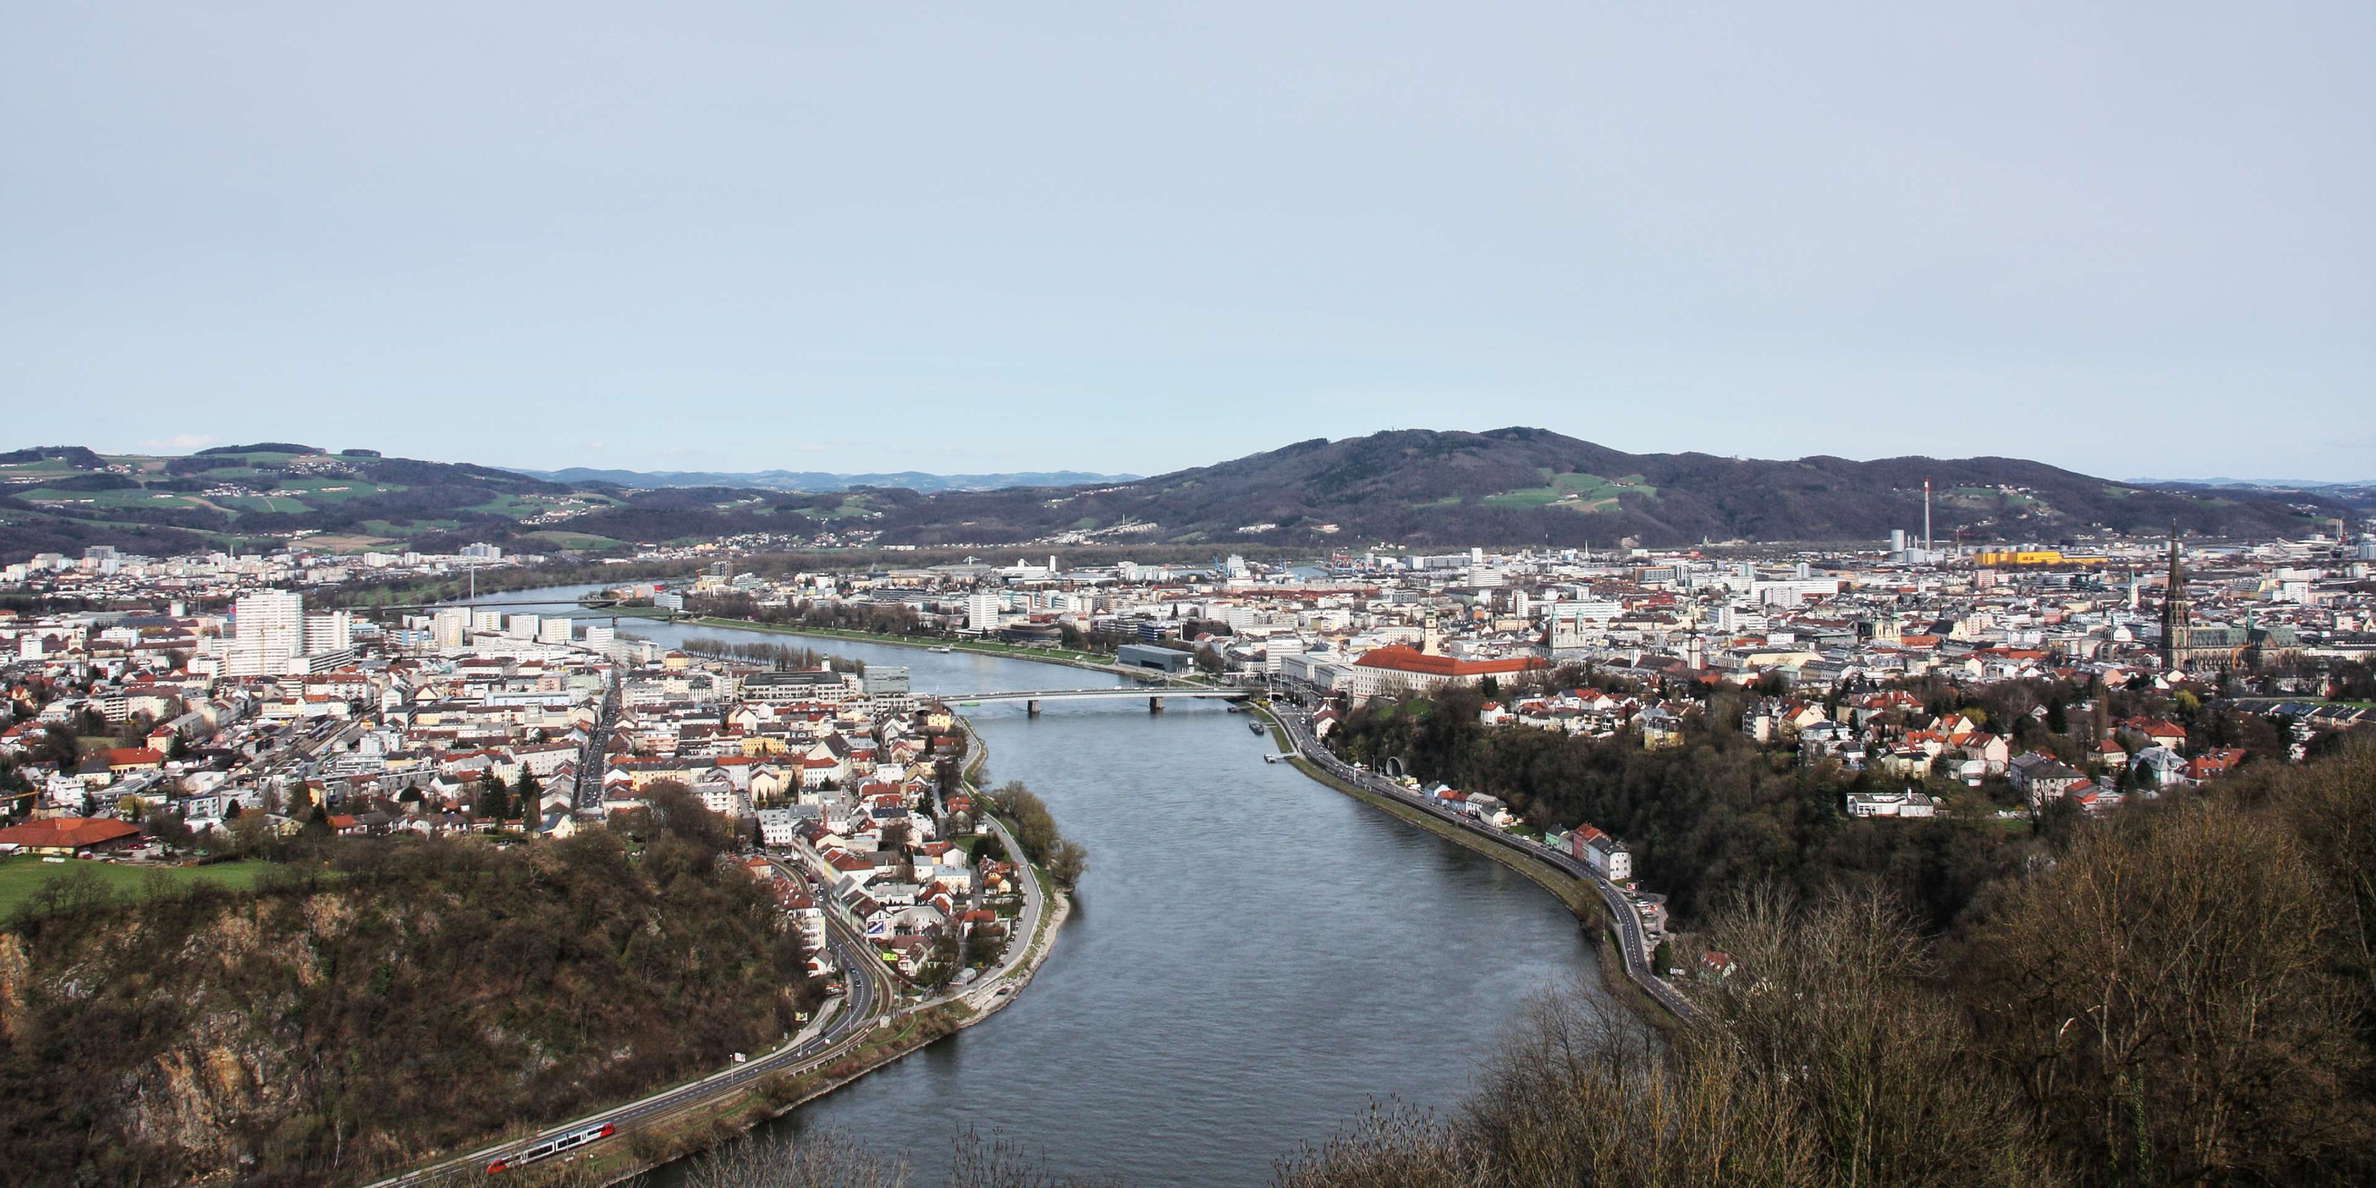 Linz panorama with Danube